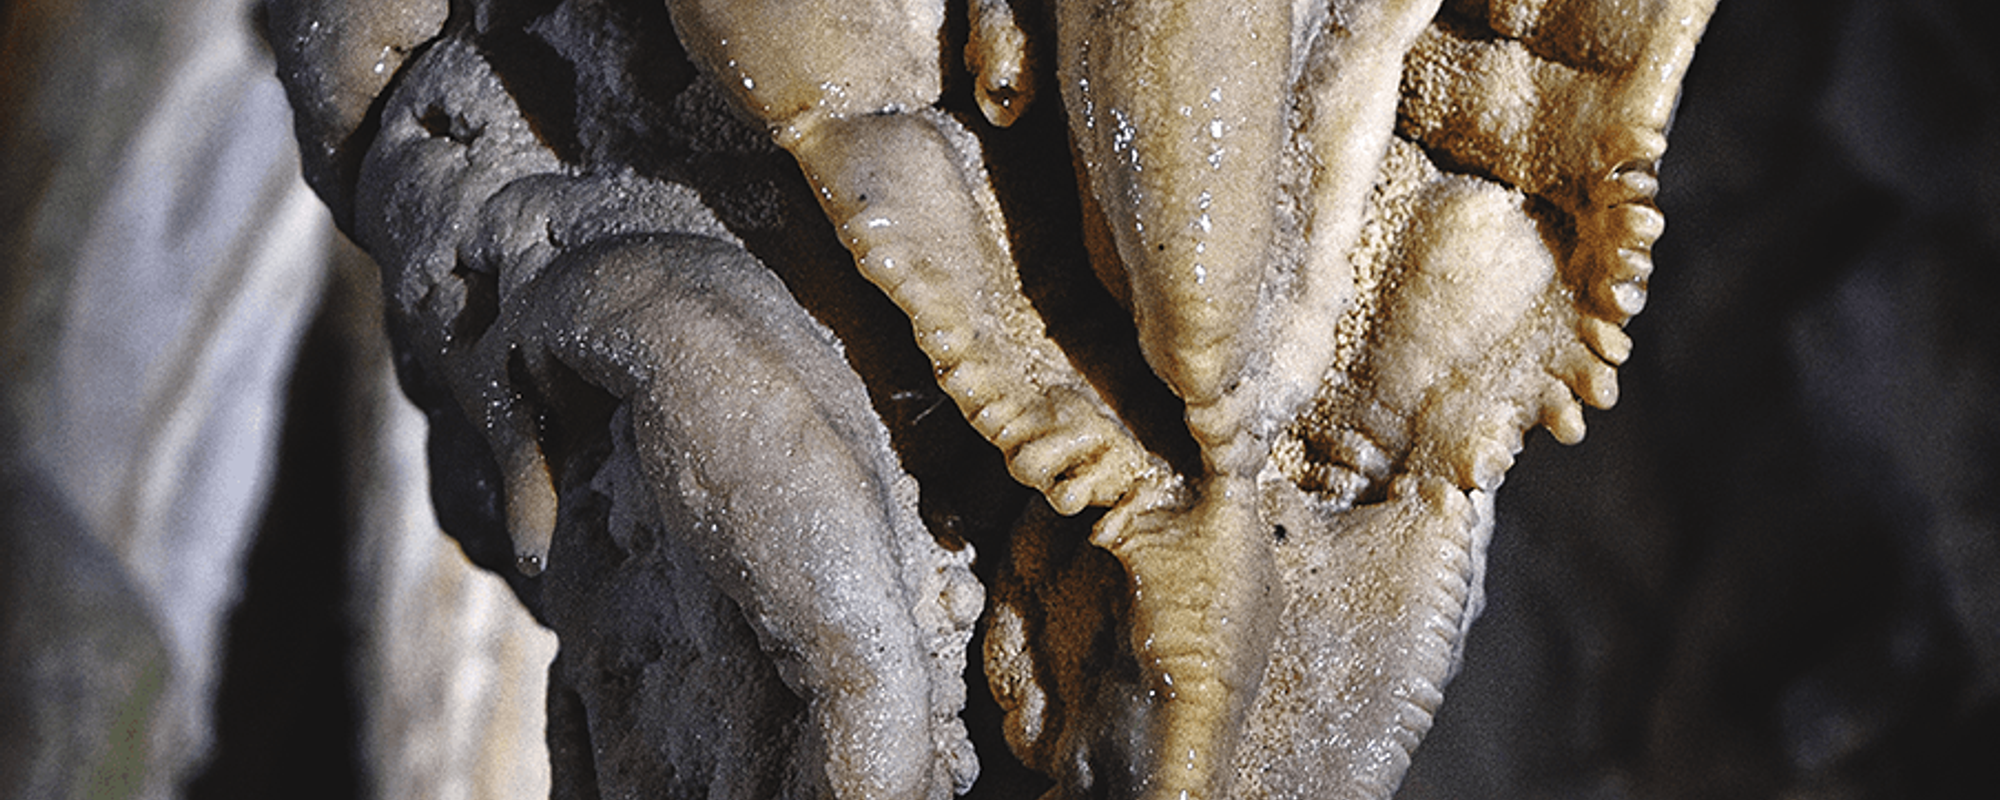 Eerie Stalactite Formations and Giger Inspiration — Caving in New Zealand, Part 1